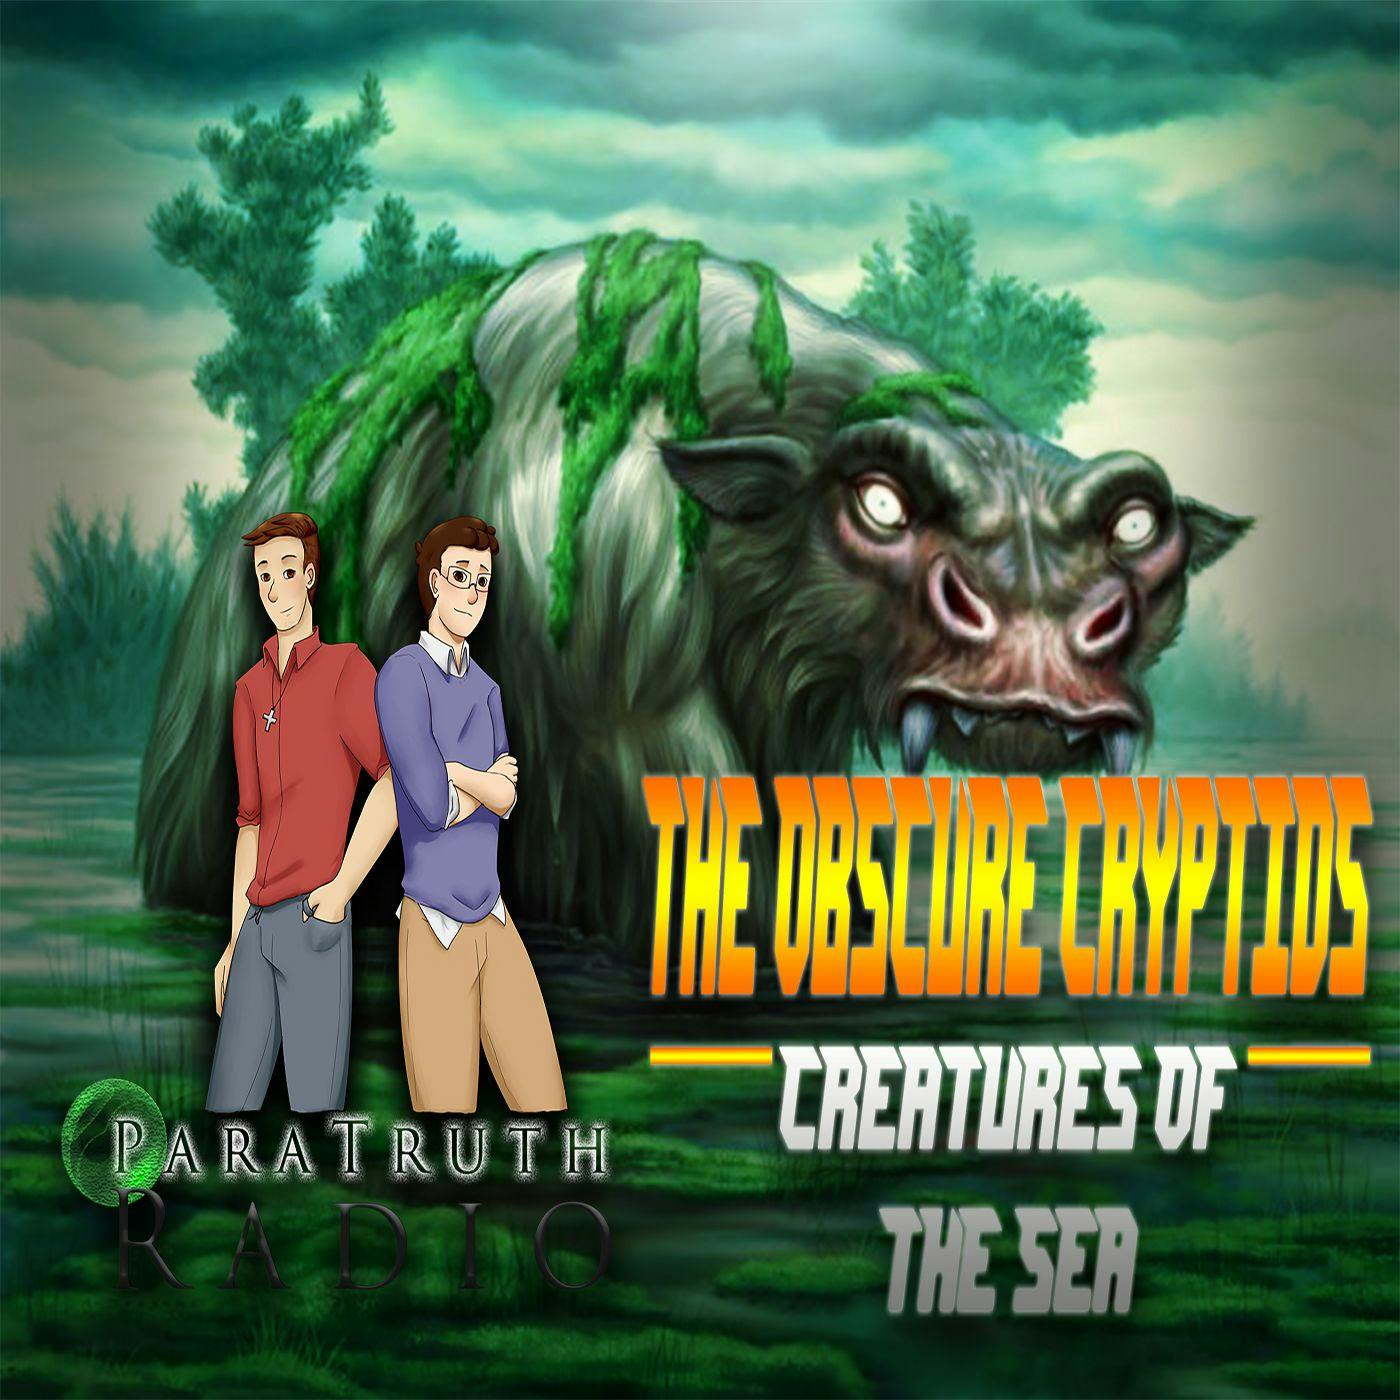 The Obscure Cryptids:  Creatures of the Land